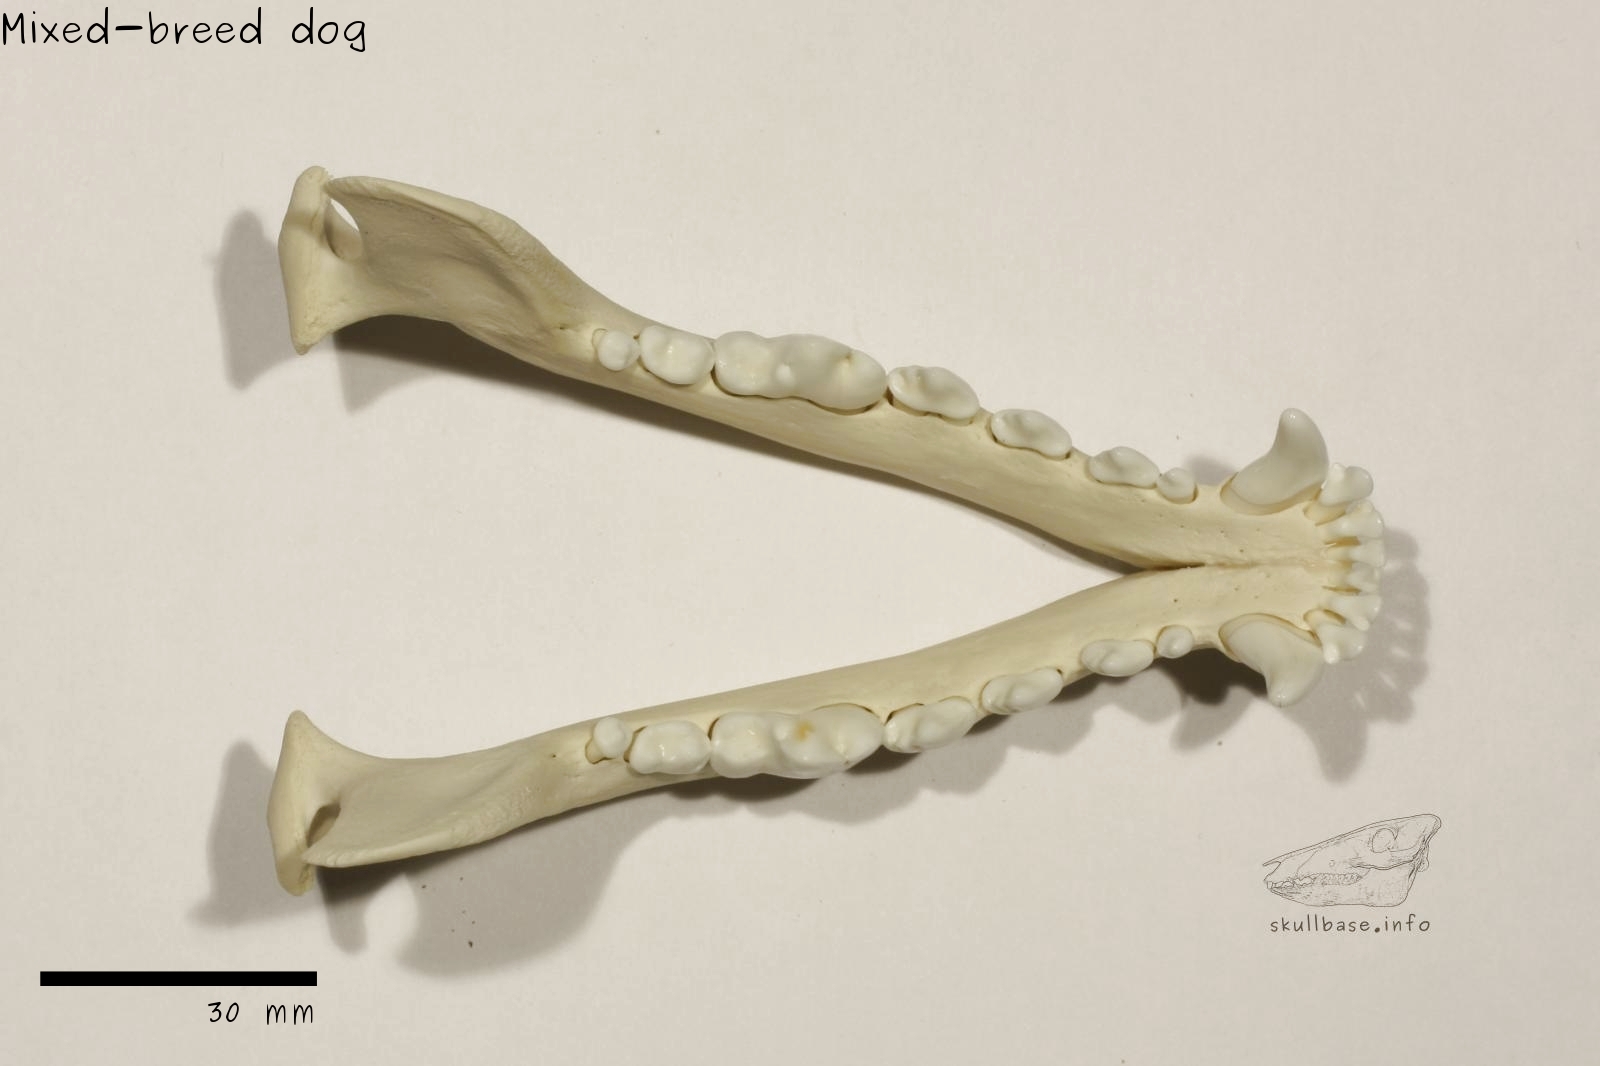 Mixed-breed dog (Canis lupus familiaris) jaw